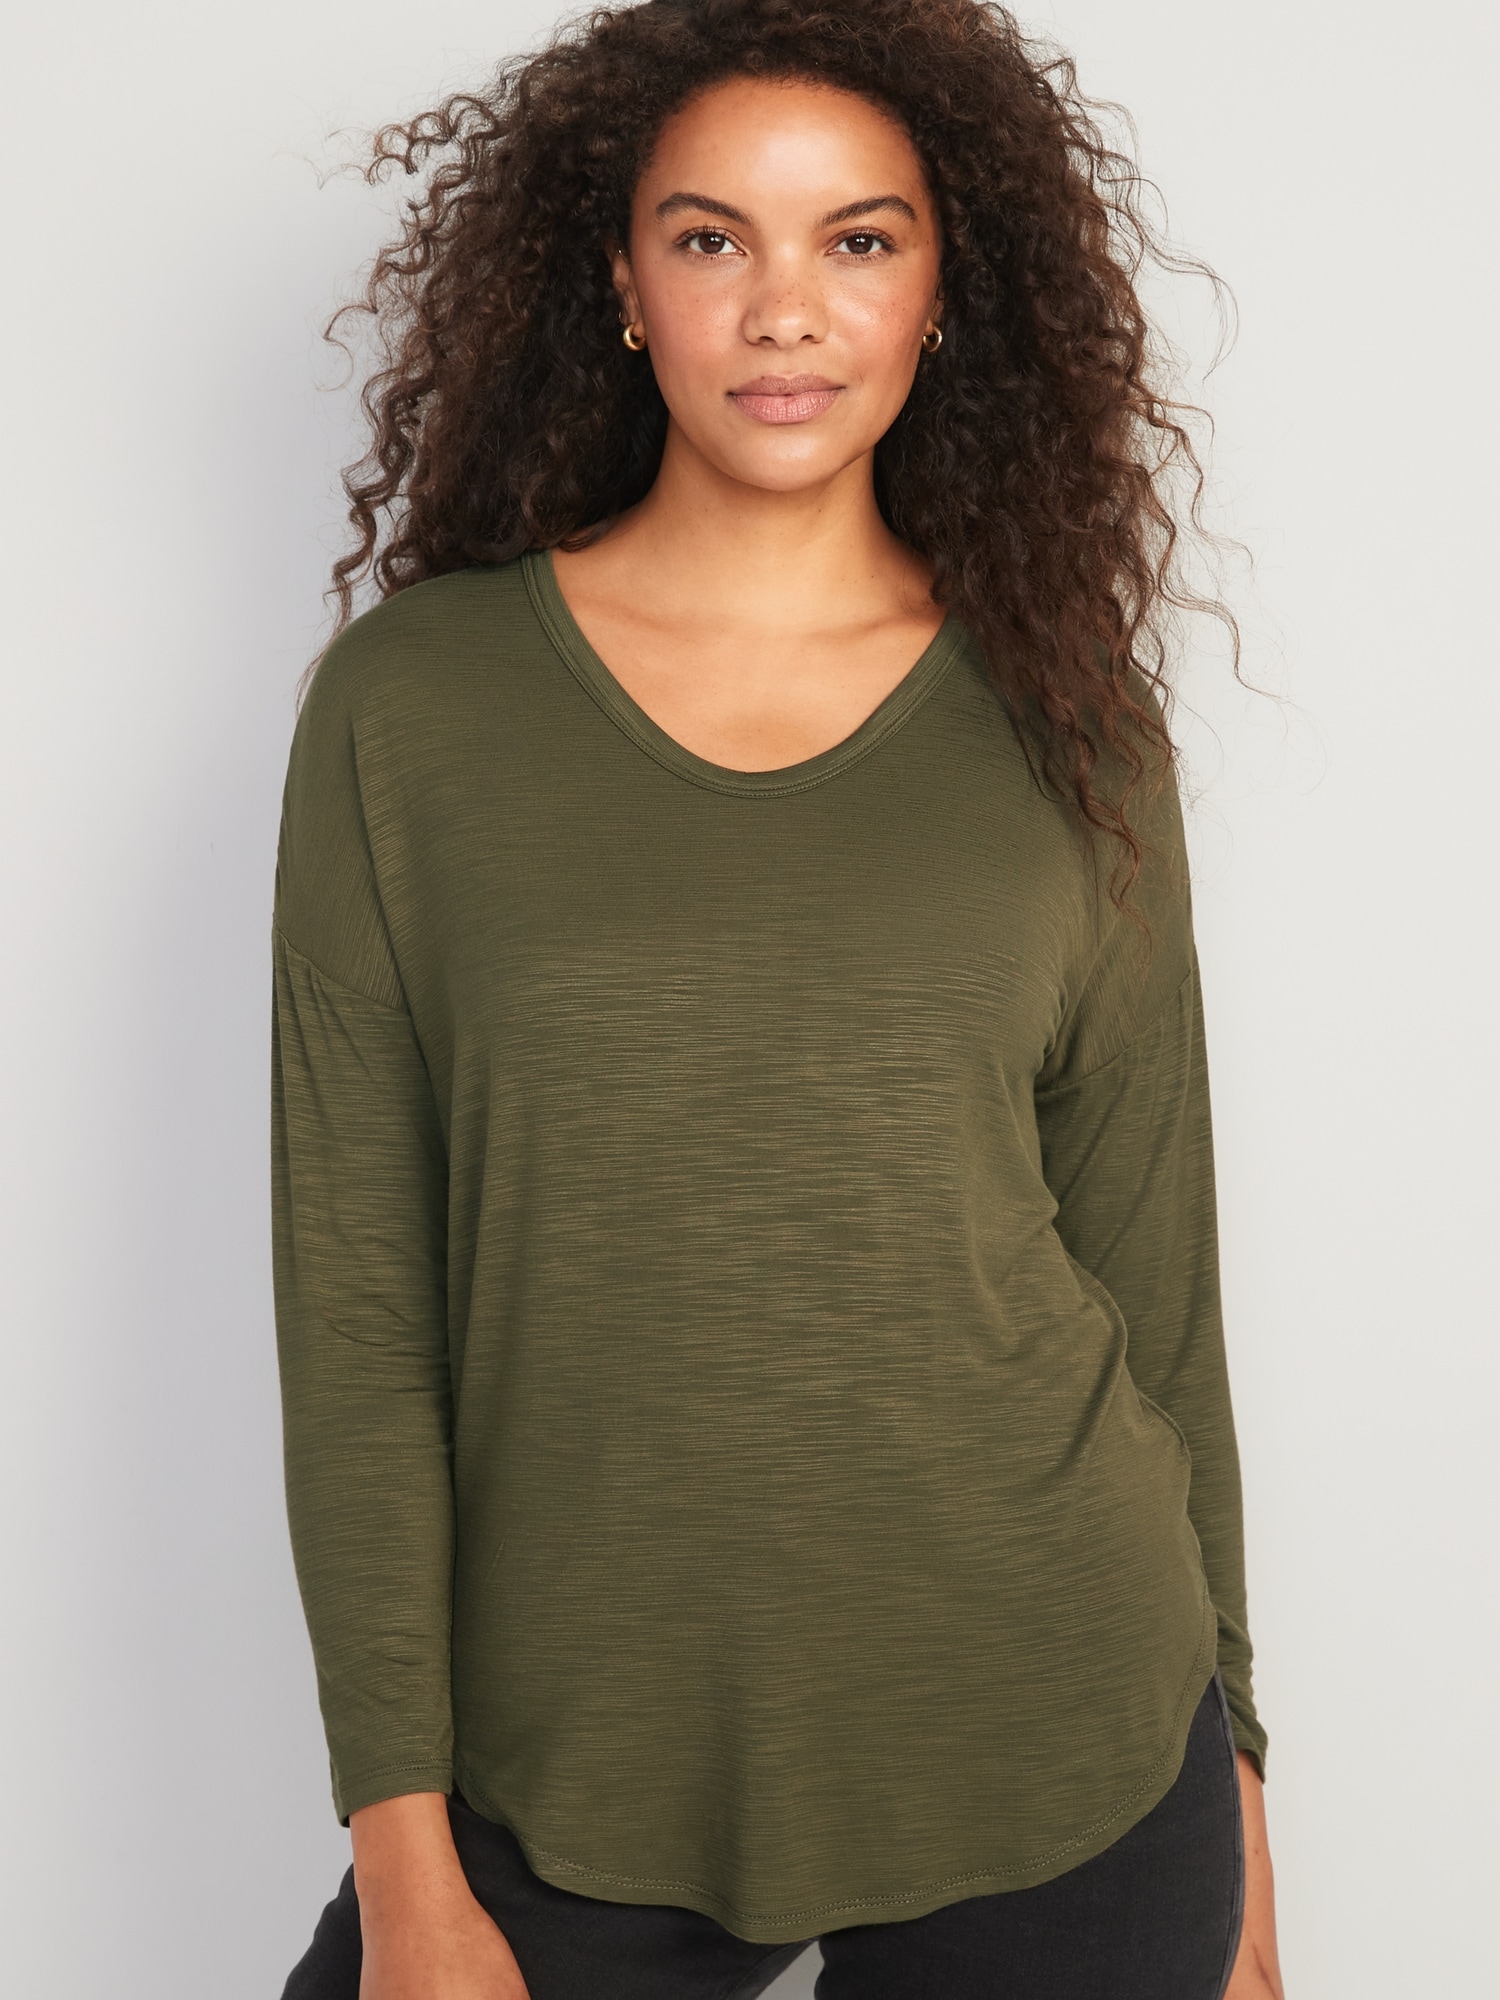 Old Navy Luxe Long-Sleeve Voop-Neck Tunic T-Shirt for Women green. 1